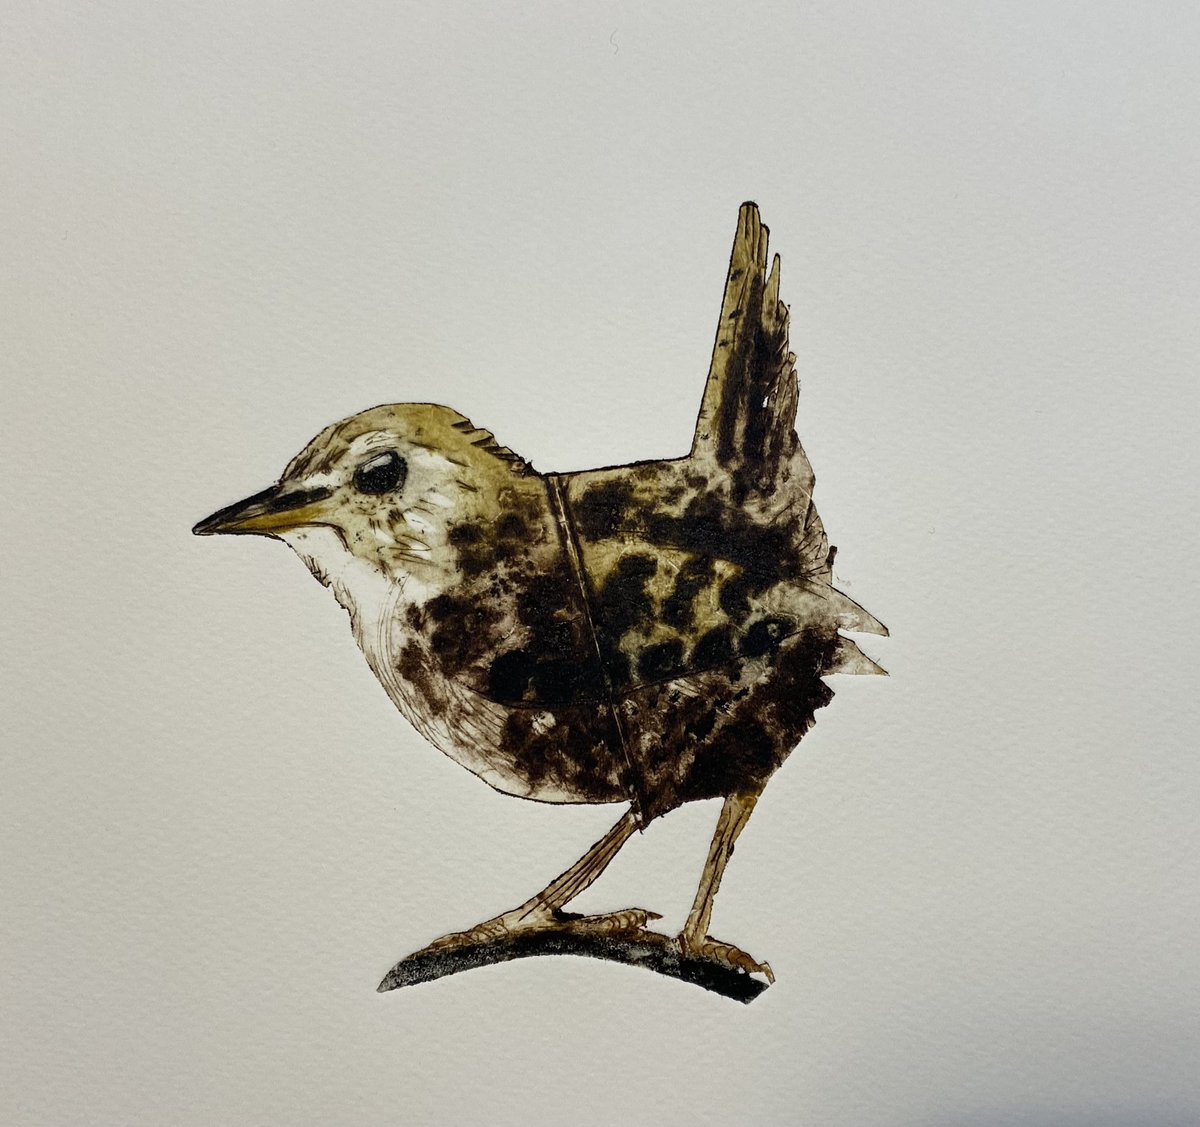 Troglodytes! What a name.
So loud and insistent the Wren’s call and such a tiny, darting bird. The first few of a small edition
#wren #tetrapakprinting #carborundum #printmaking #northyorkshireopenstudios